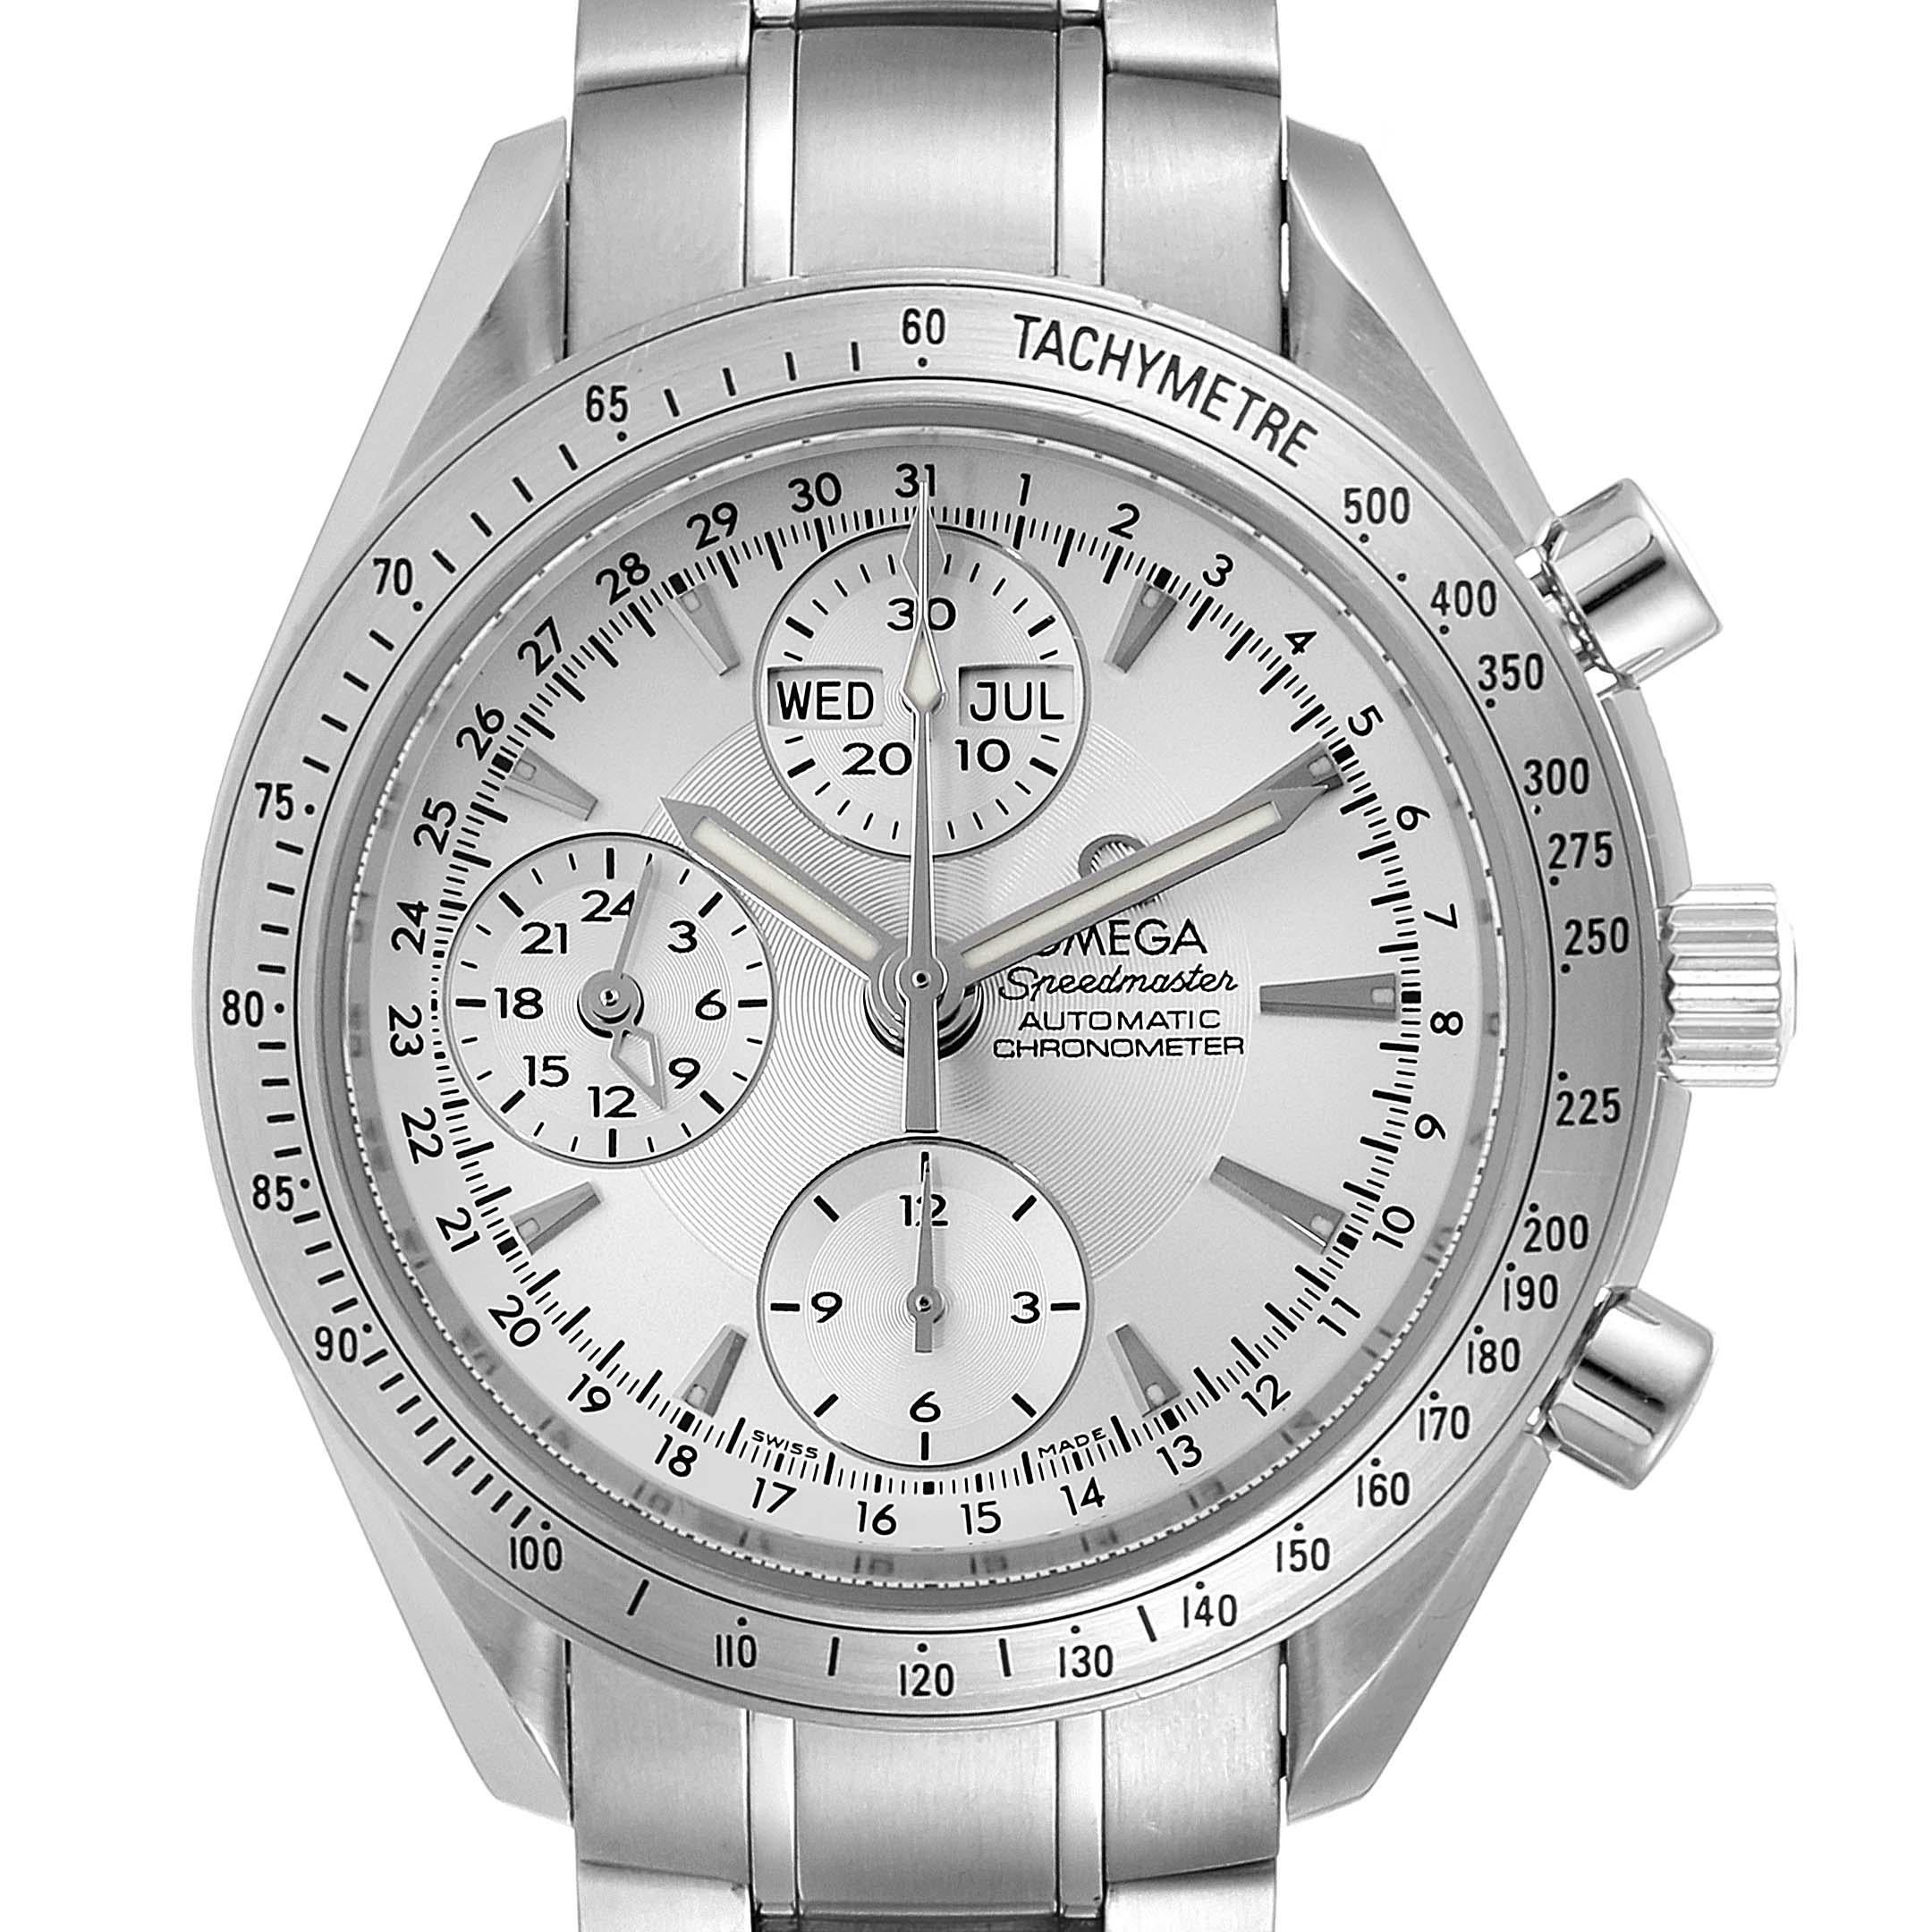 Omega Speedmaster Day Date Chrono Silver Dial Watch 3221.30.00. Automatic self-winding chronograph movement. Day, date and month indications. Stainless steel round case 40 mm in diameter. Stainless steel bezel with tachymetric scale.